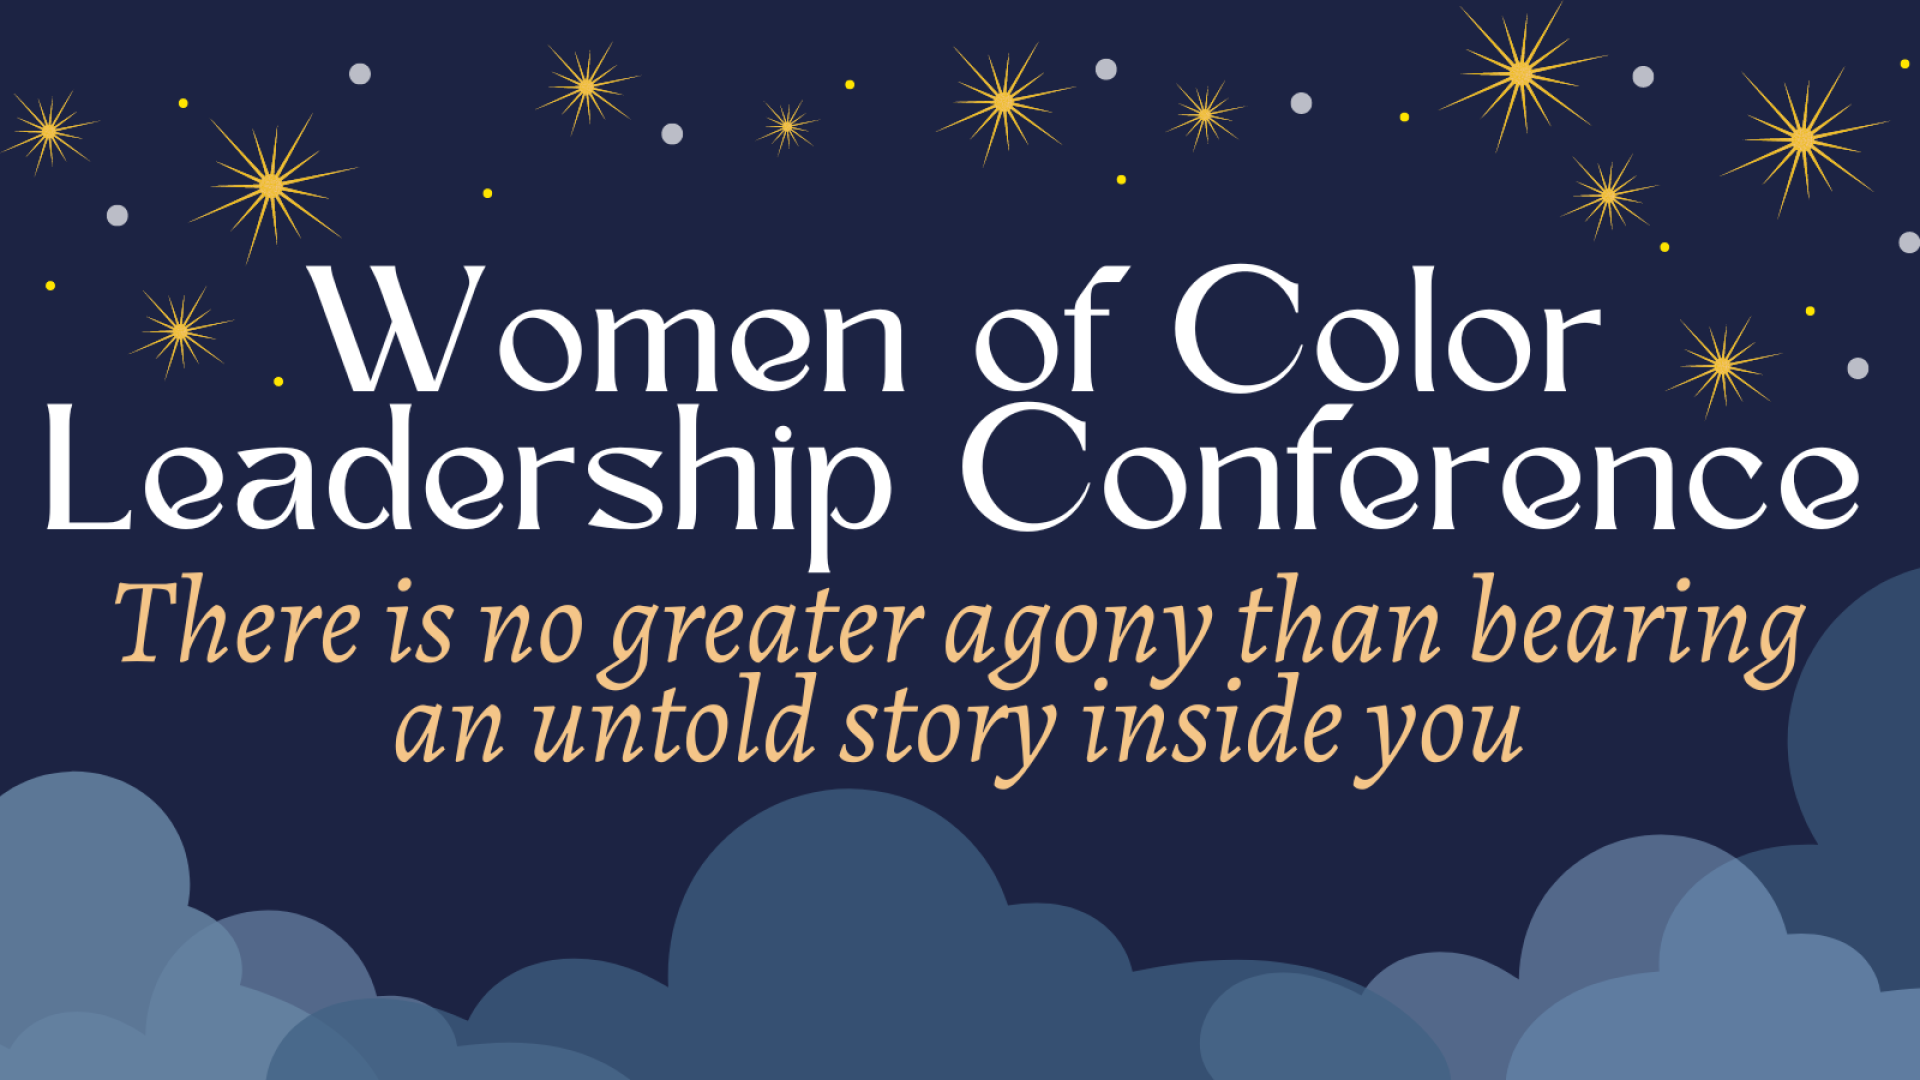 Women of Color Leadership Conference Reception